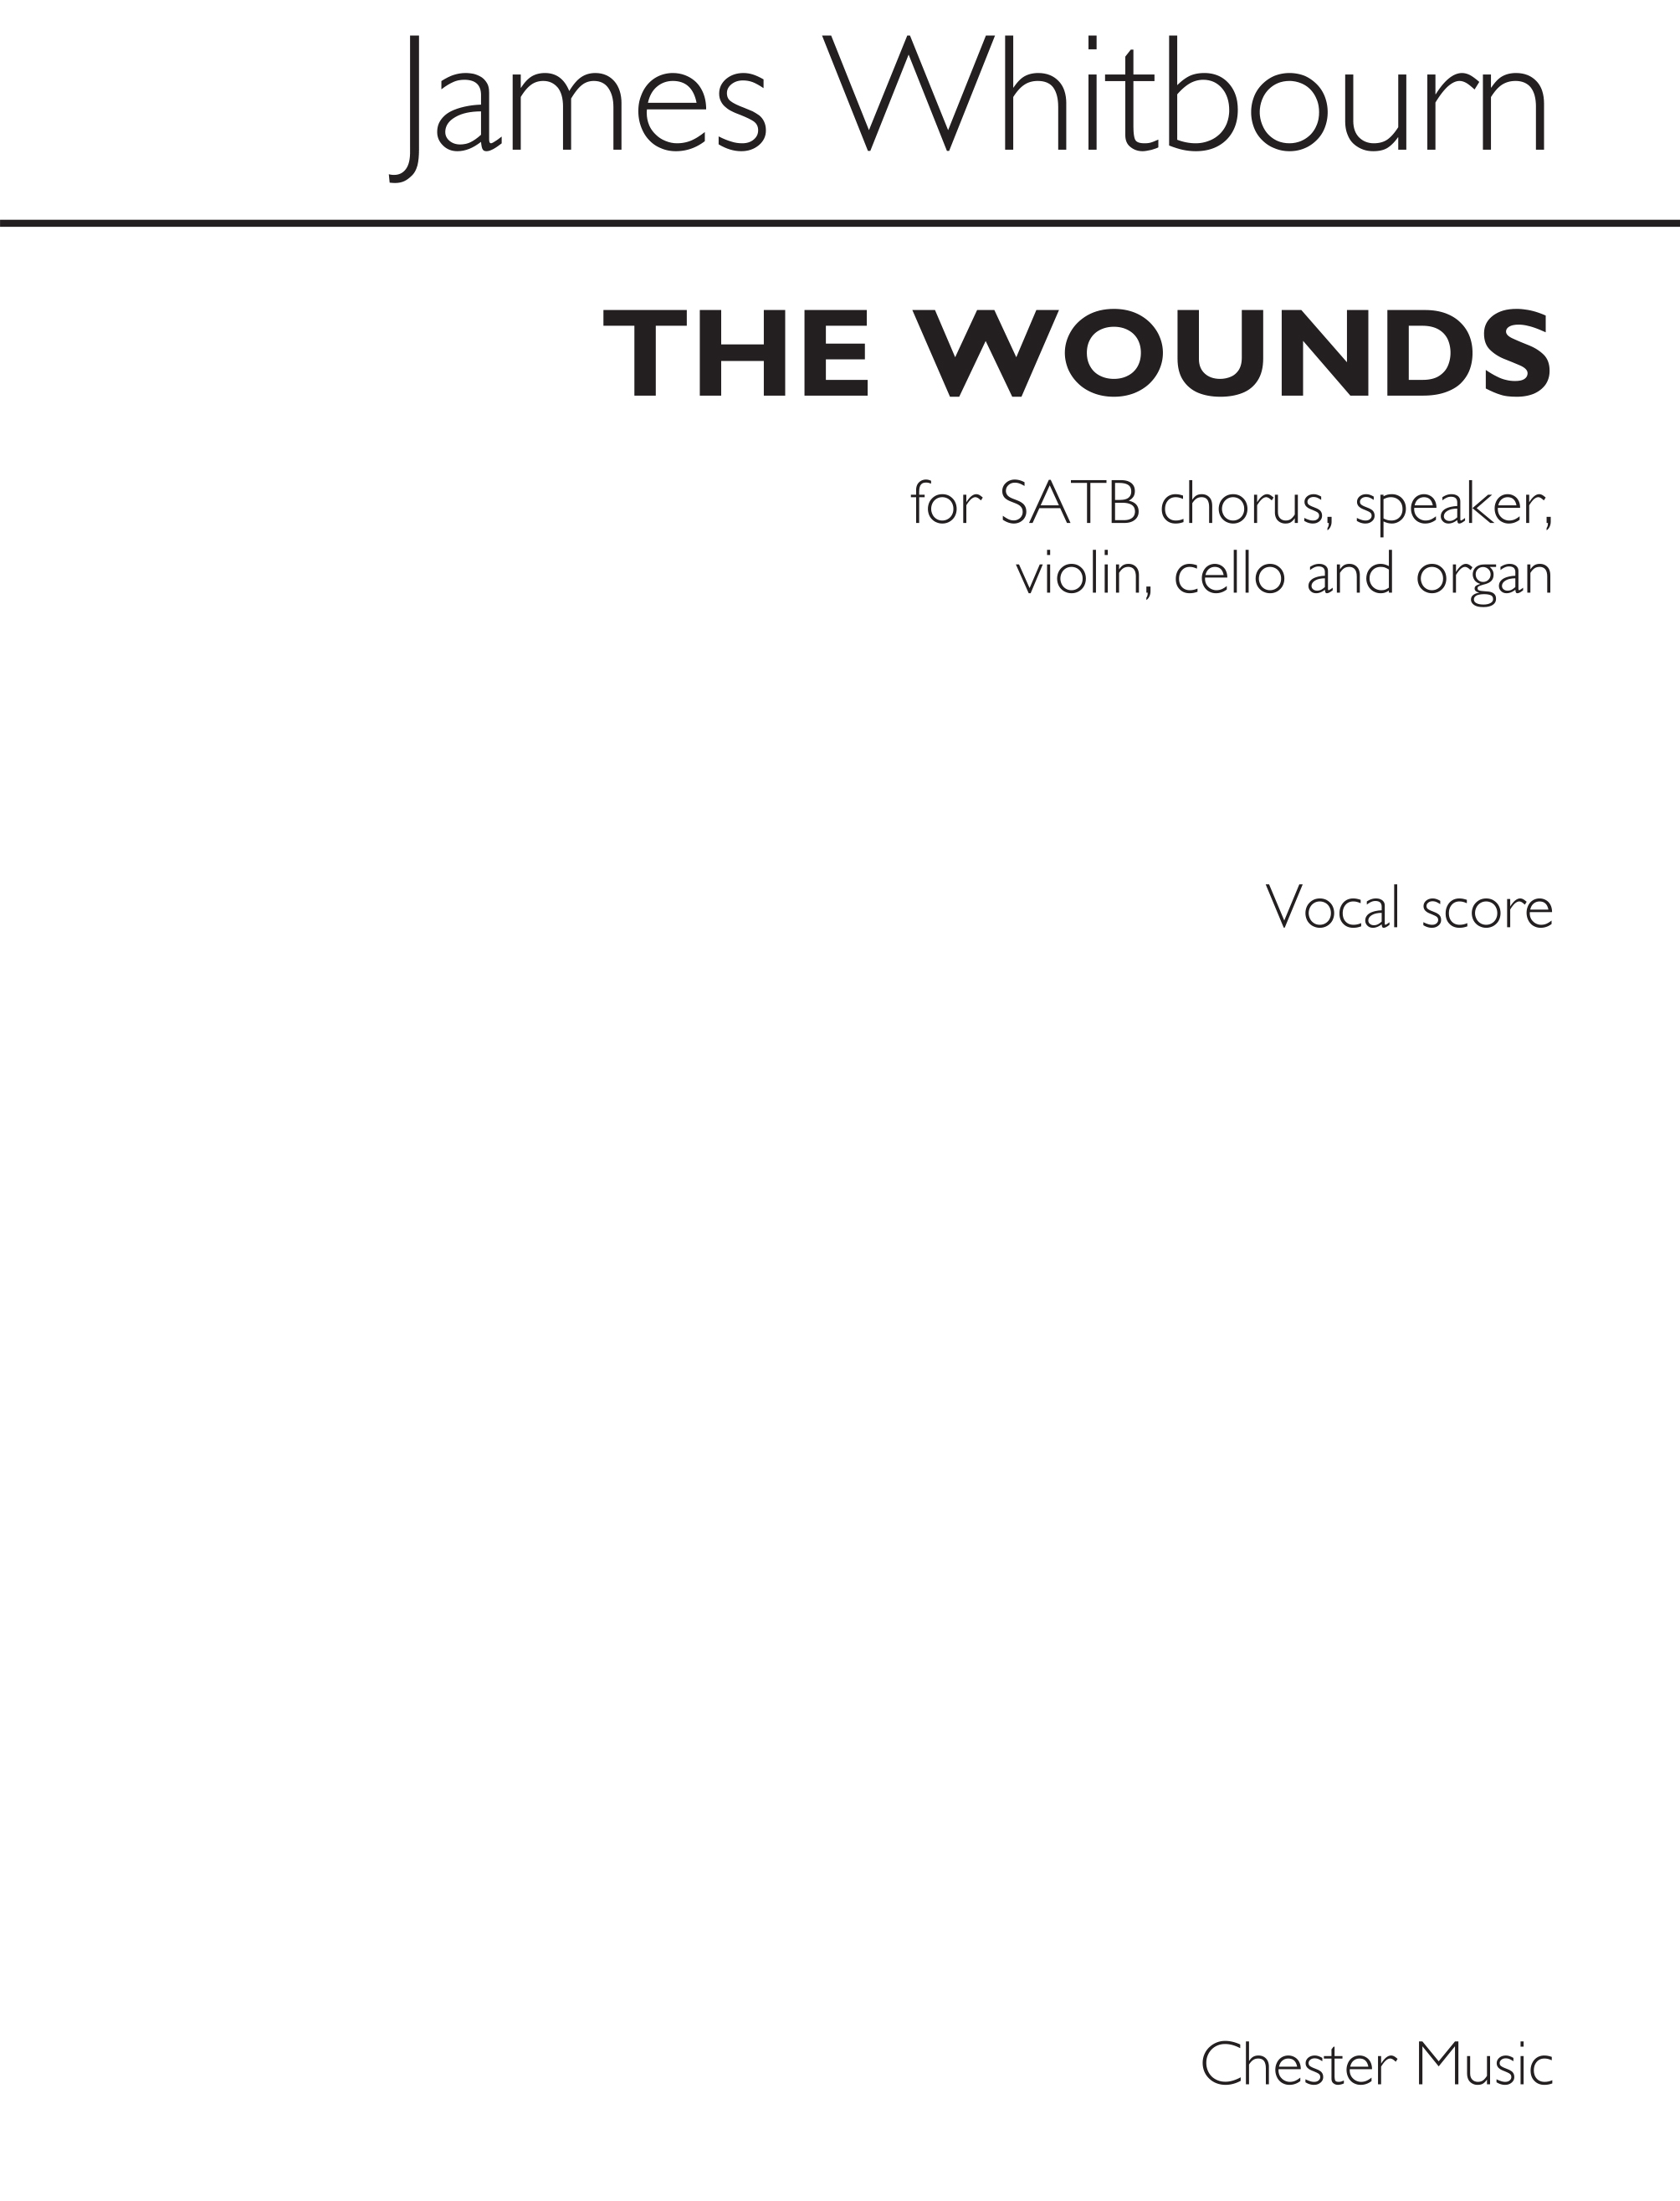 James Whitbourn: James Whibourn: The Wounds (Vocal Score): SATB: Vocal Score